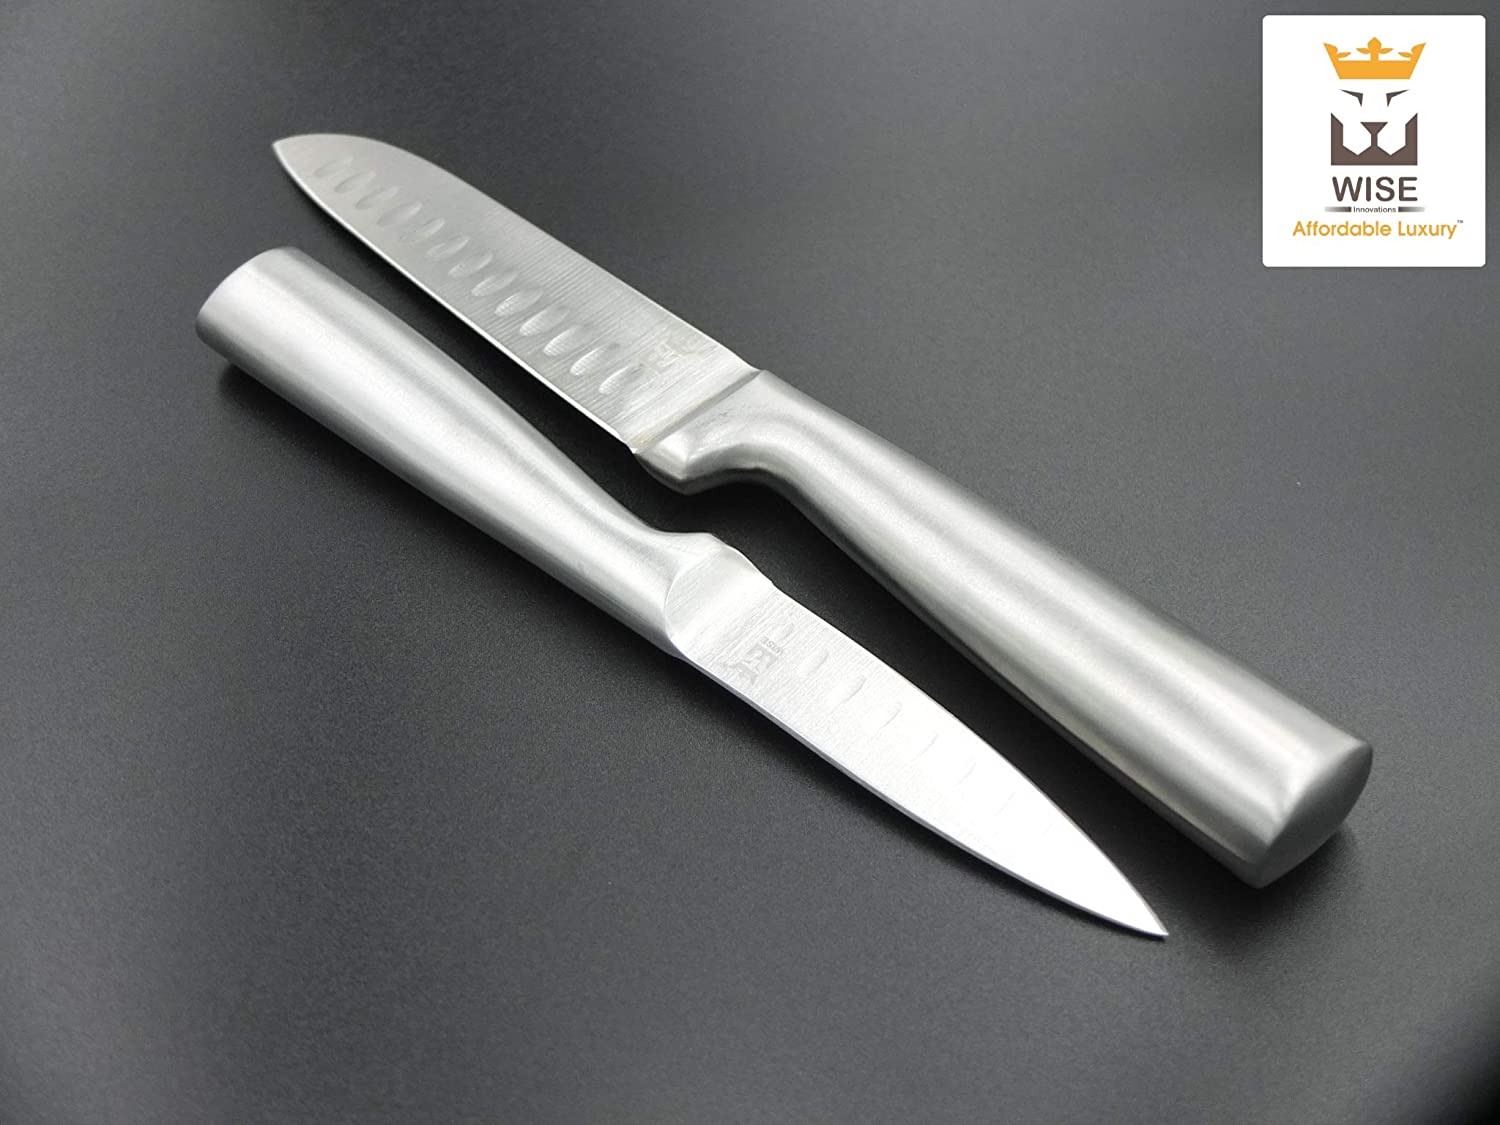 Wise Apical Knife Set (Big & Small)-Home & Kitchen Accessories-dealsplant